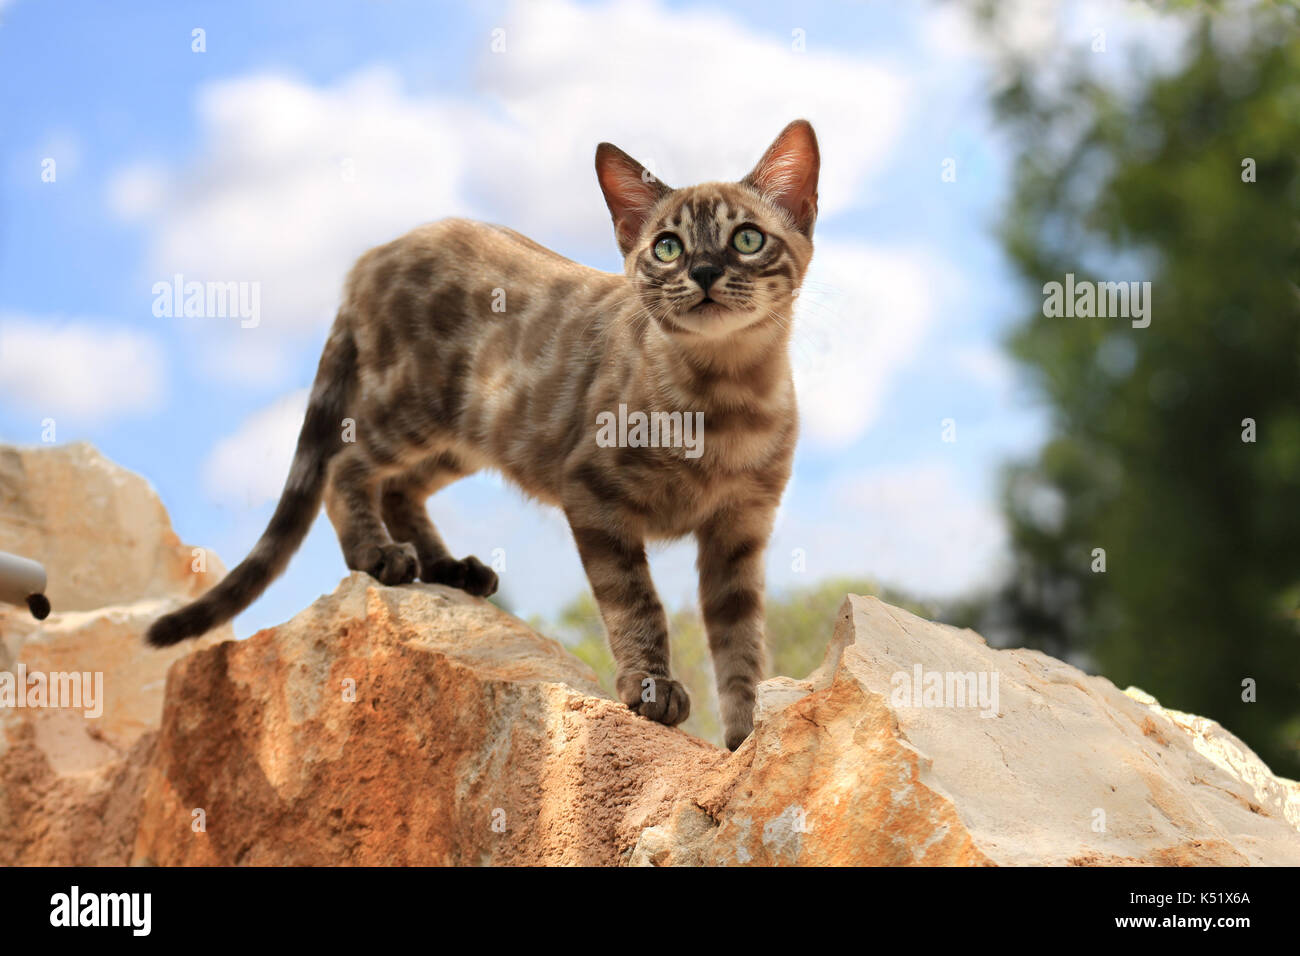 snowbengal, seal mink spotted tabby, standing on a stone in front of a blue sky with clouds Stock Photo